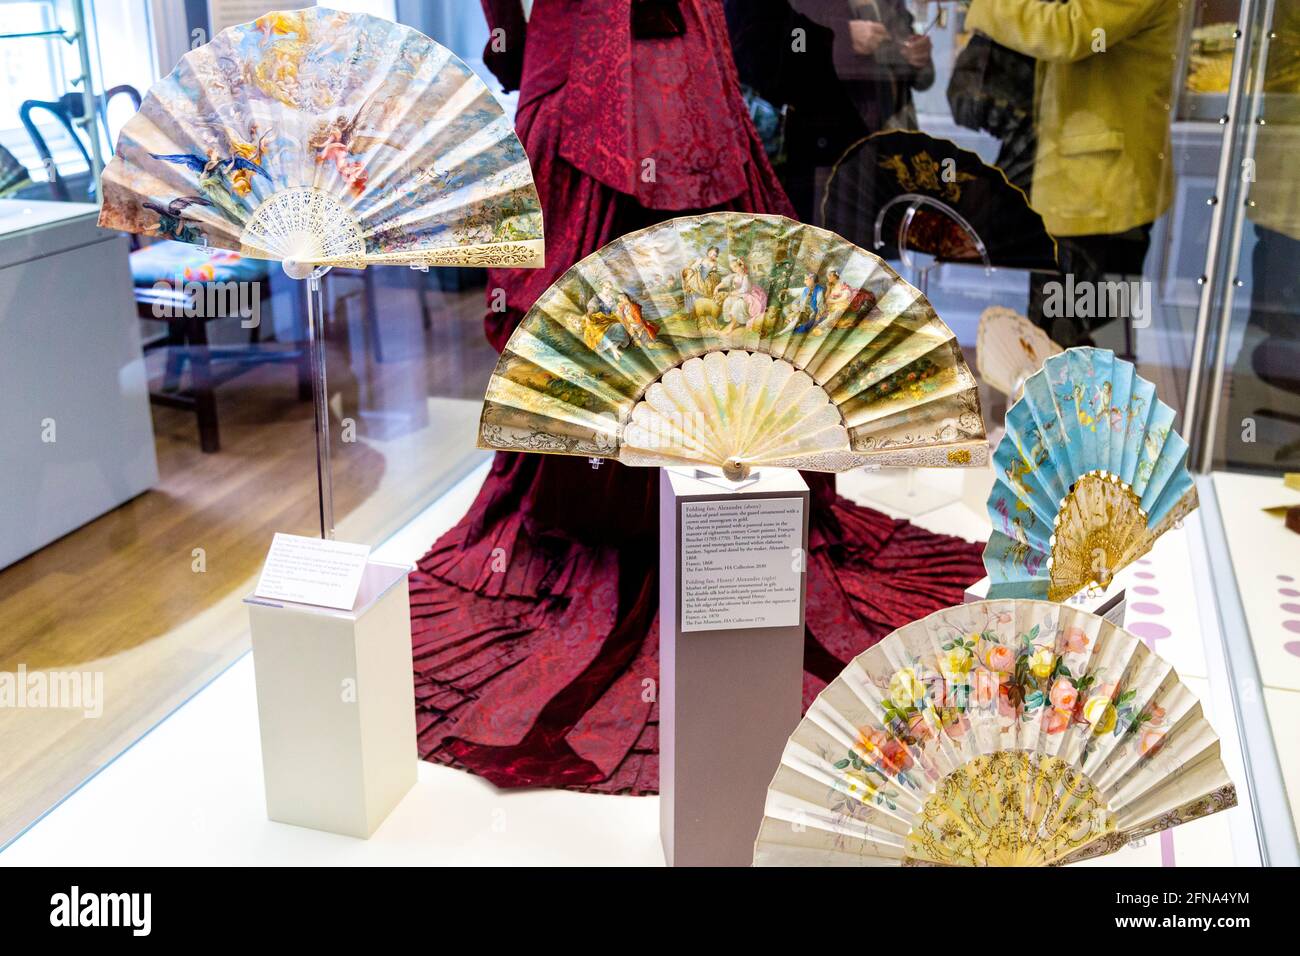 Display at the Fan Museum, Greenwich, London, UK Stock Photo